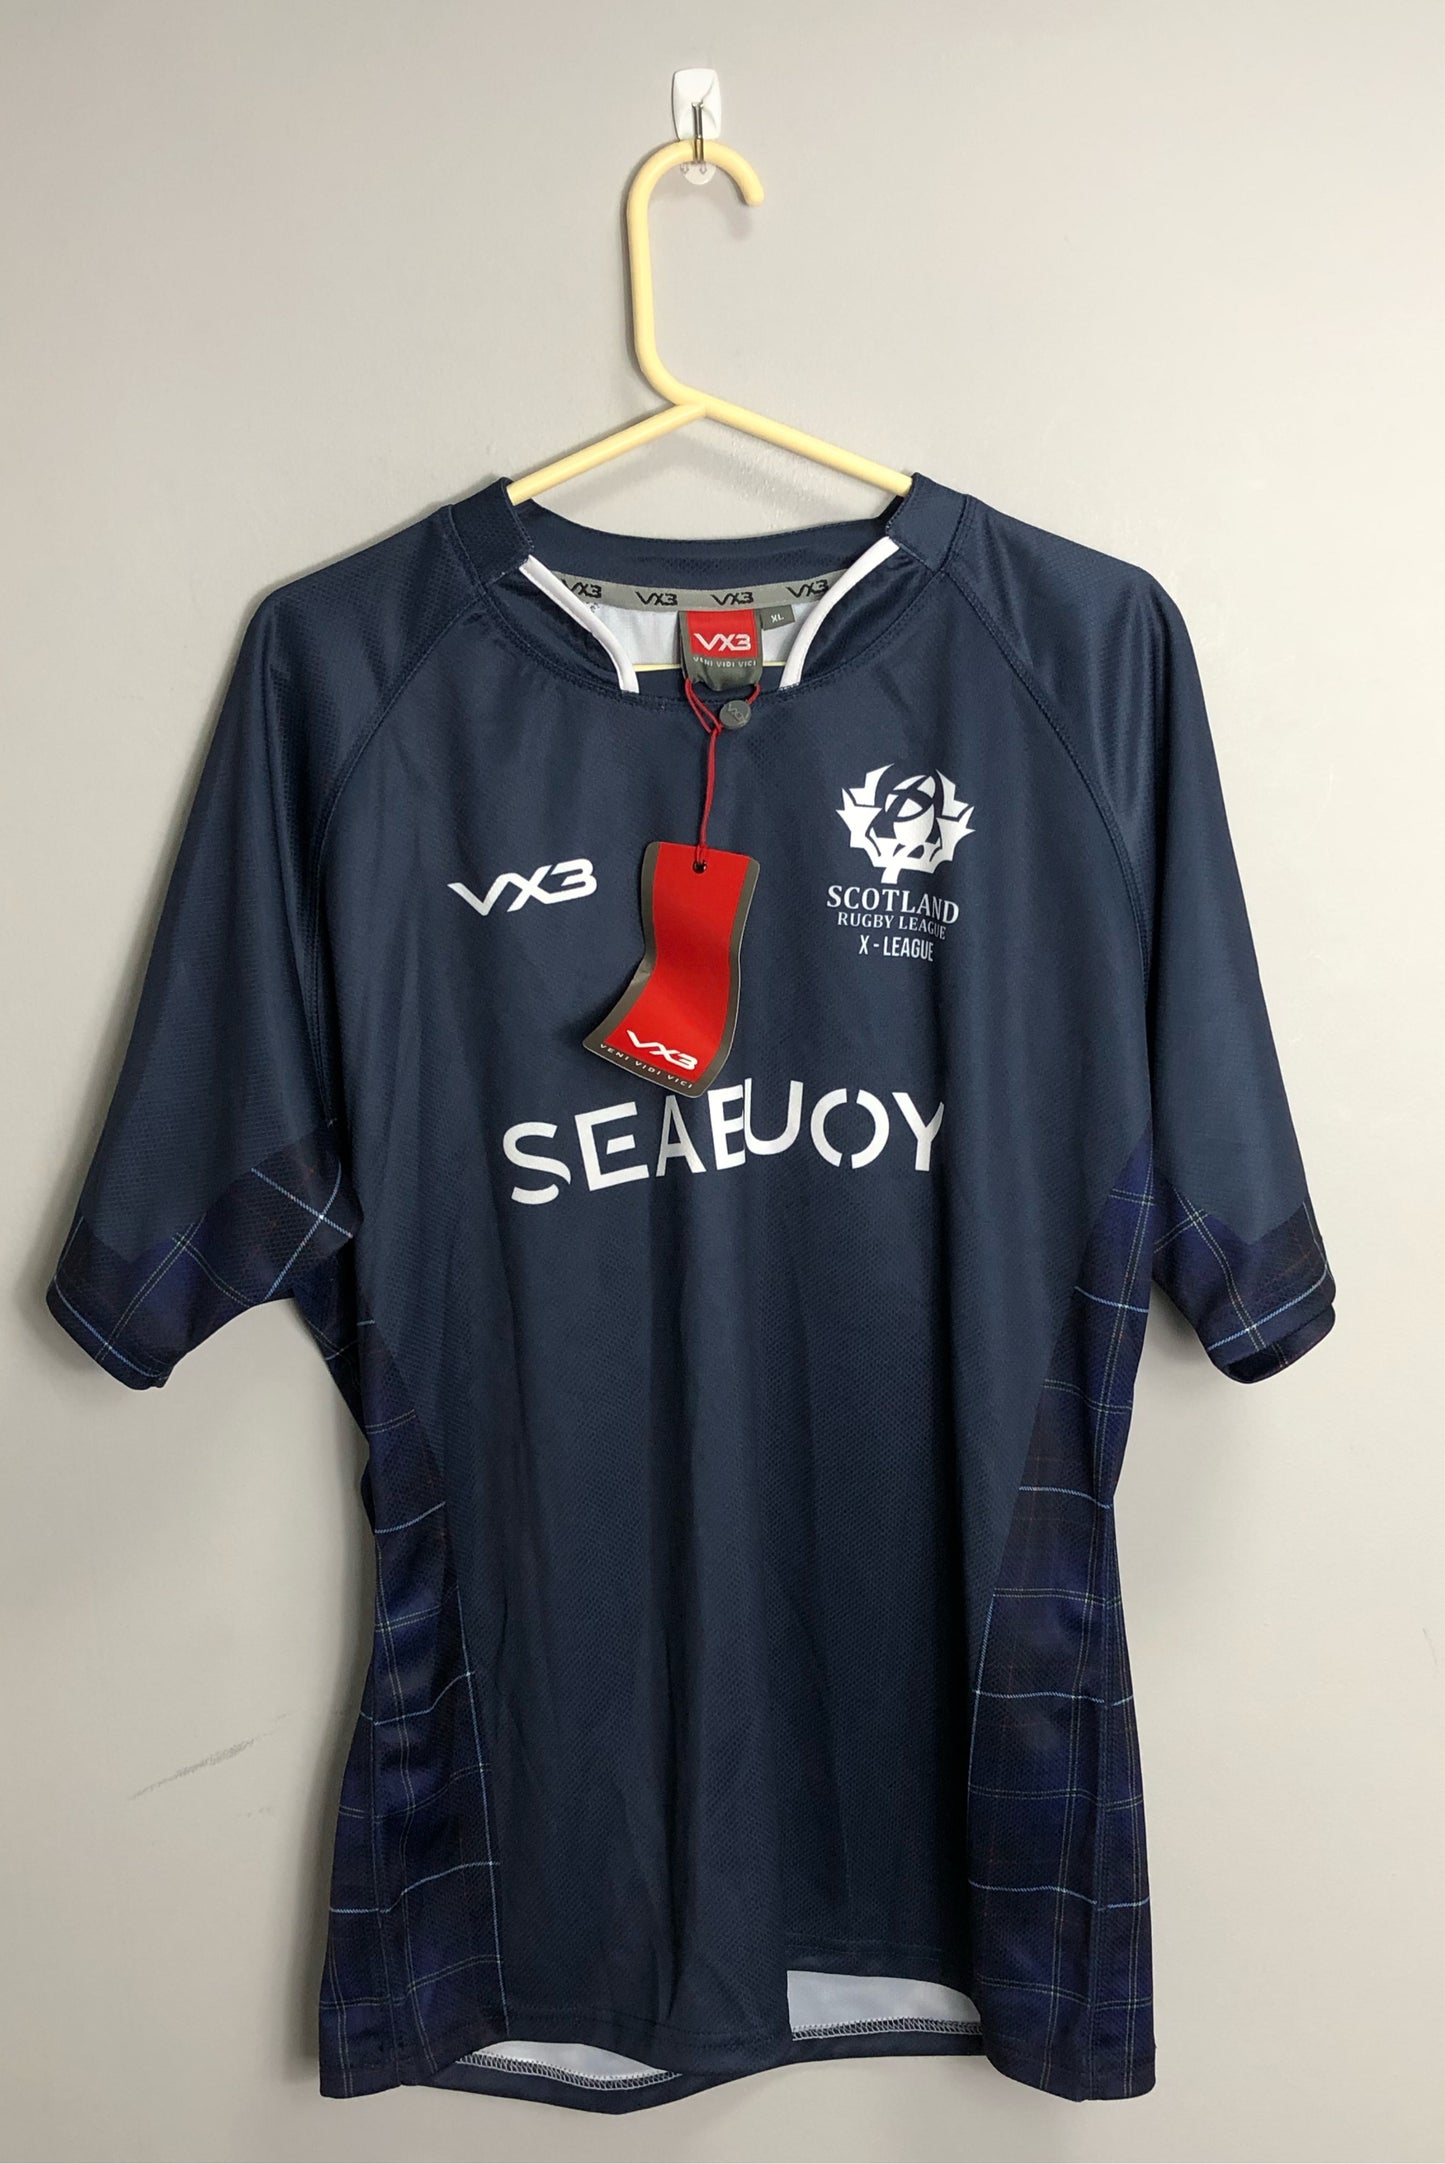 Scottish Rugby League Player Issue Match Shirts